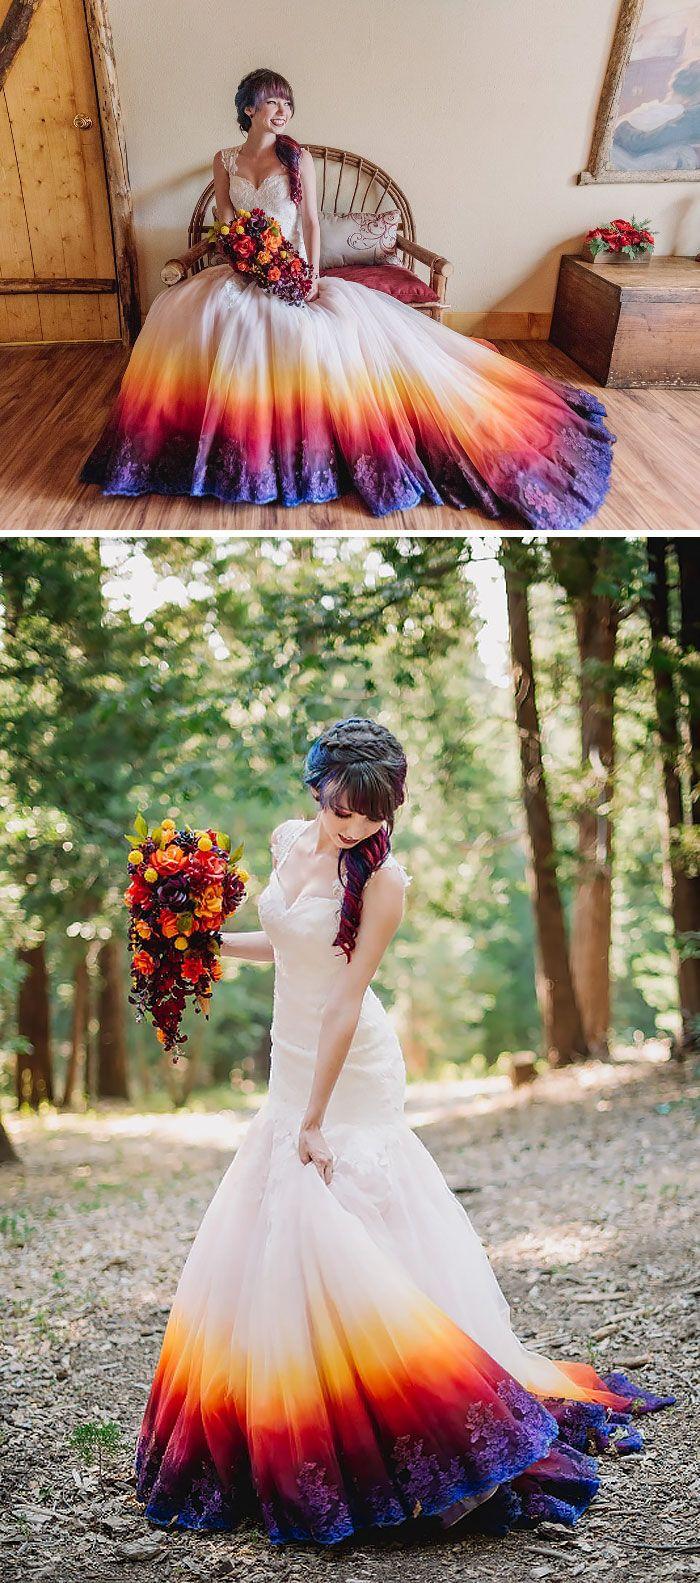 Mariage - Dip Dye Wedding Dress Trend Will Make Your Big Day More Colorful